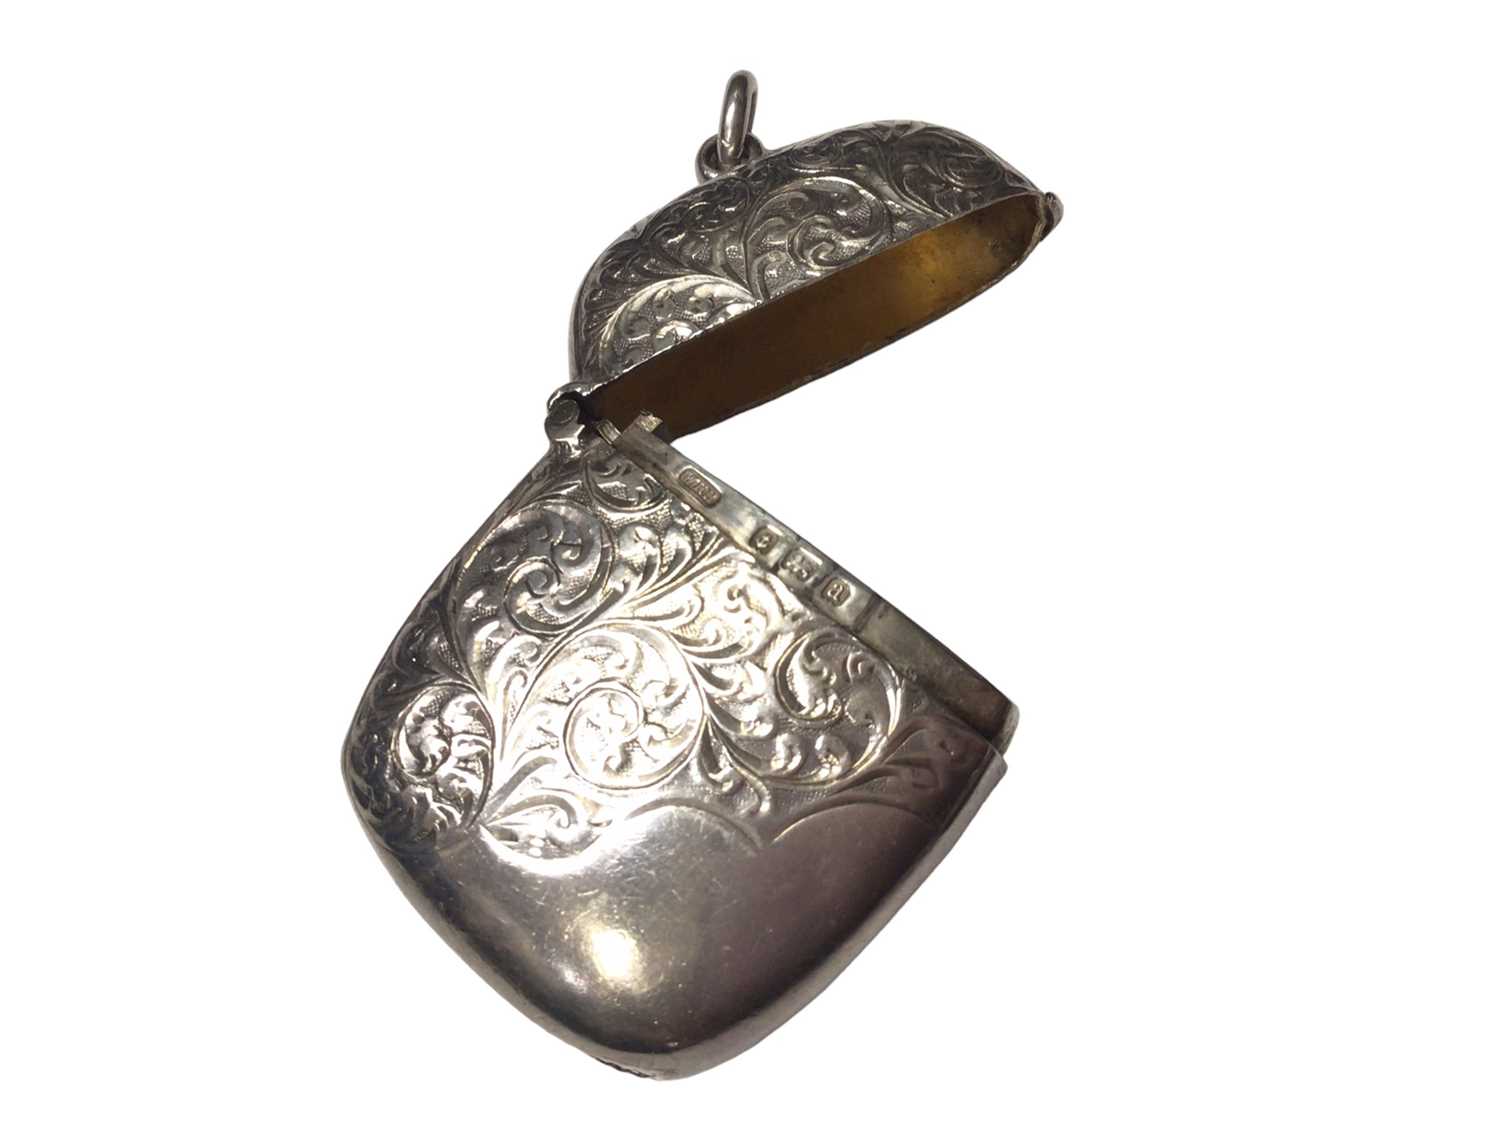 Late Victorian silver heart shaped scent bottle with engraved foliate decoration by Sampson Mordan, - Image 7 of 7